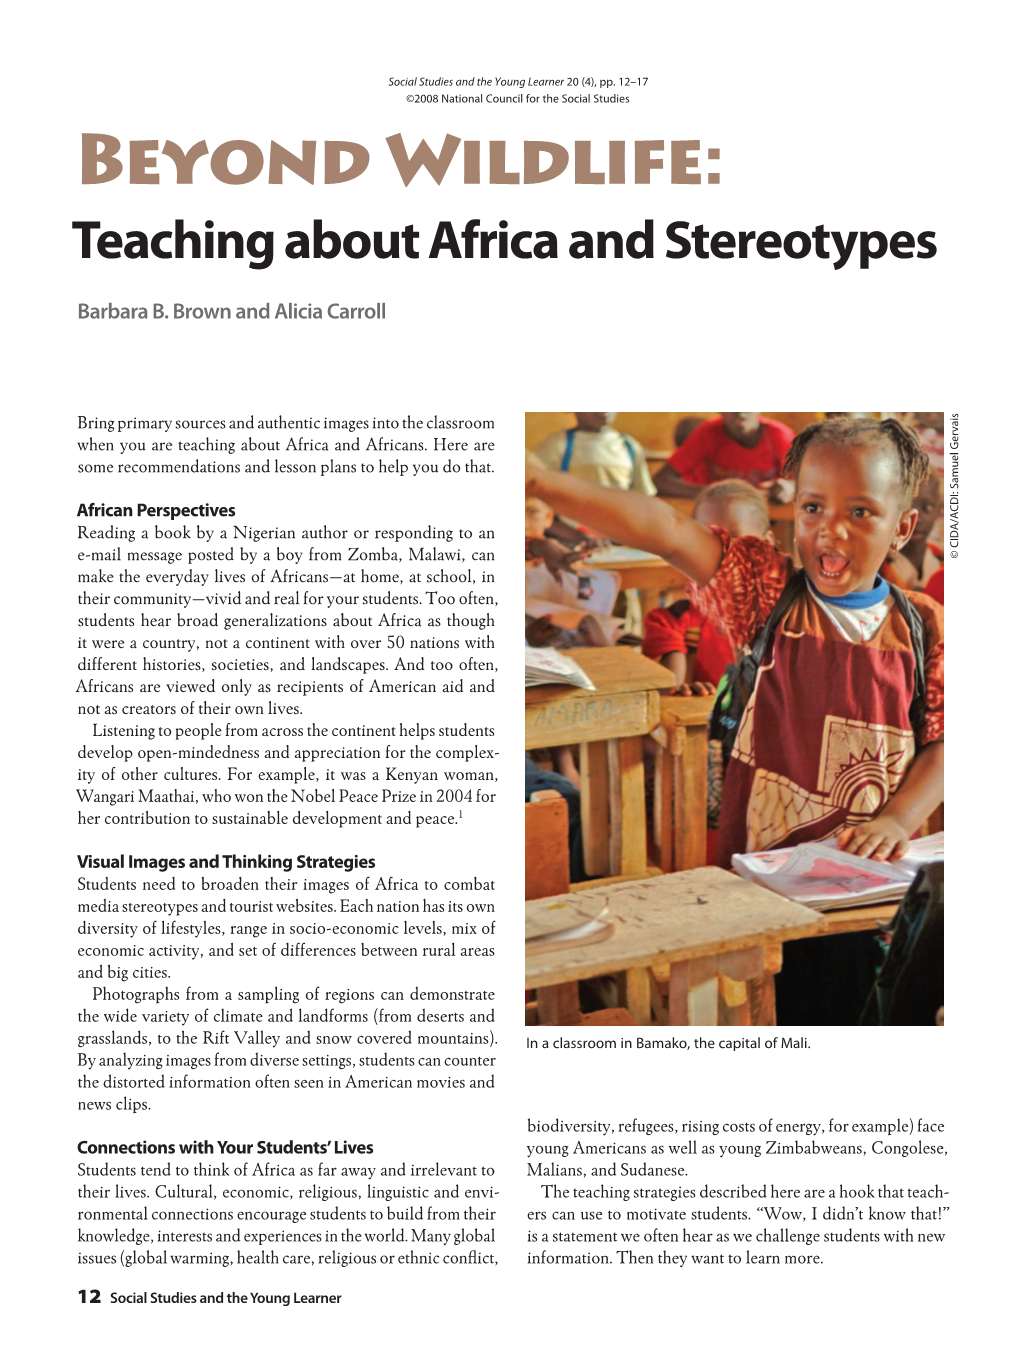 Beyond Wildlife: Teaching About Africa and Stereotypes